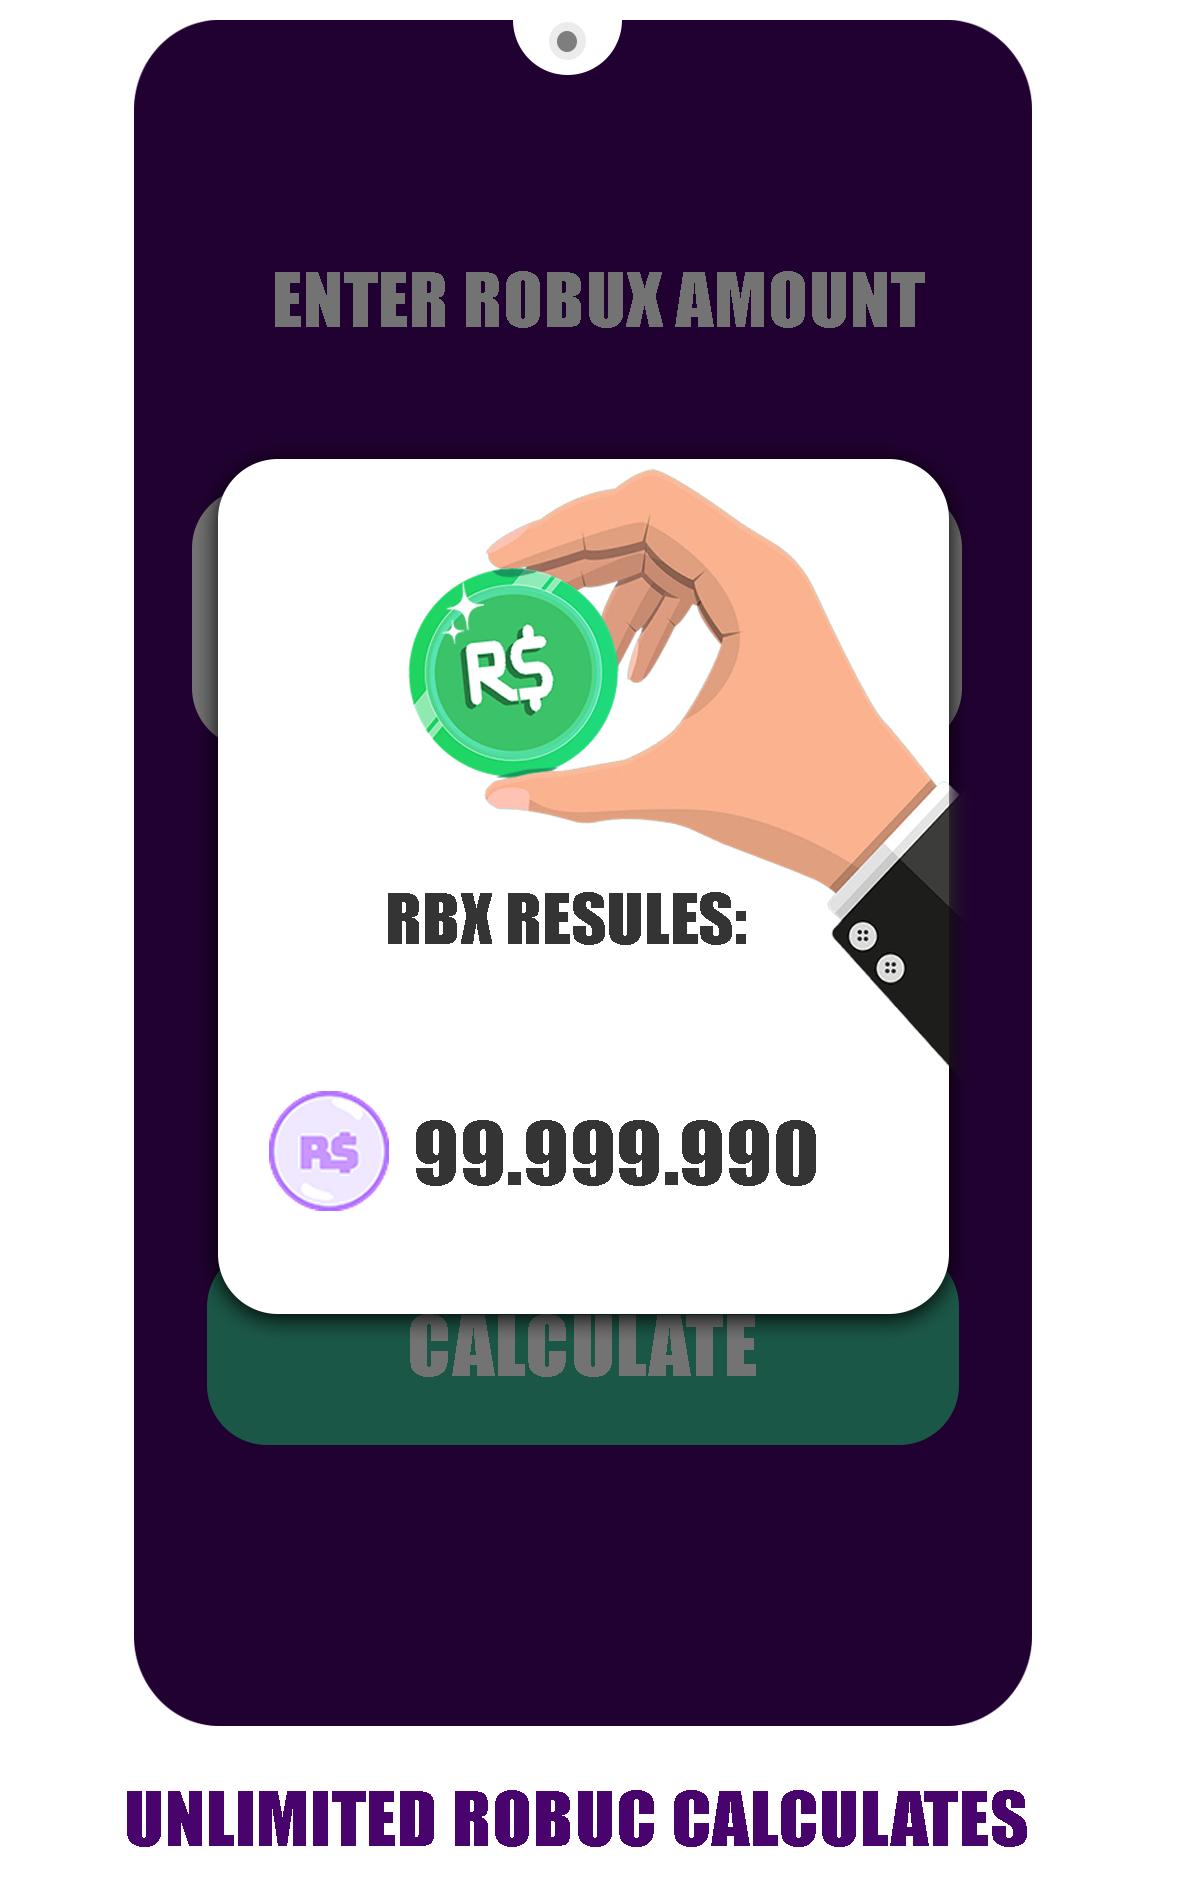 Free Robux Calc For RBLOX - RBX Station for Android - APK Download - 